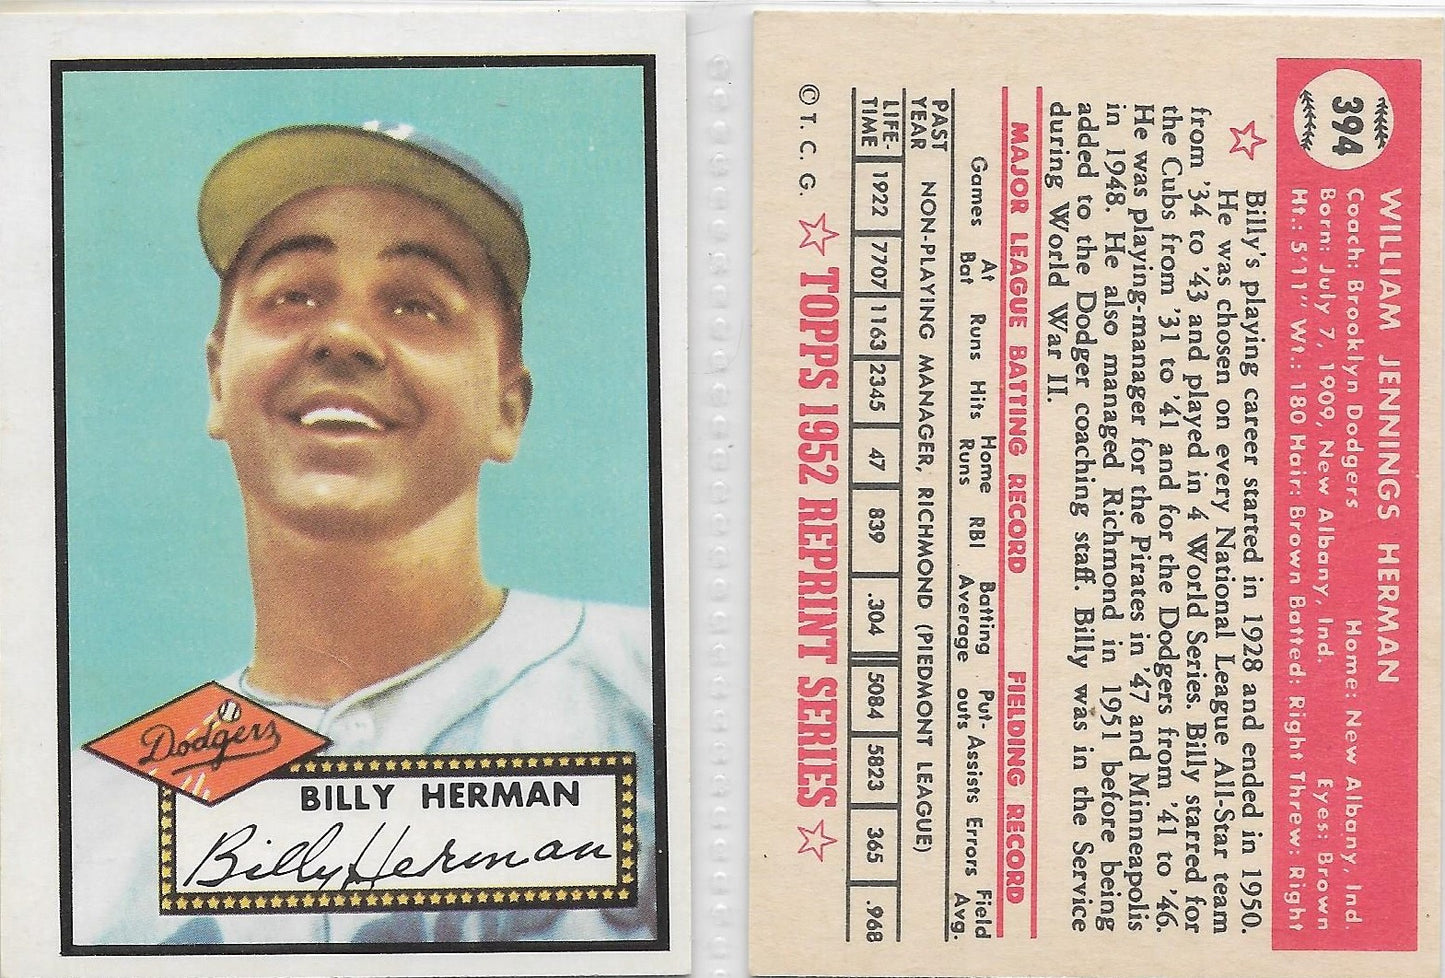 1983 TOPPS '52 REPRINT CARDS STARS - BILLY HERMAN  - CHICAGO CUBS Card #394